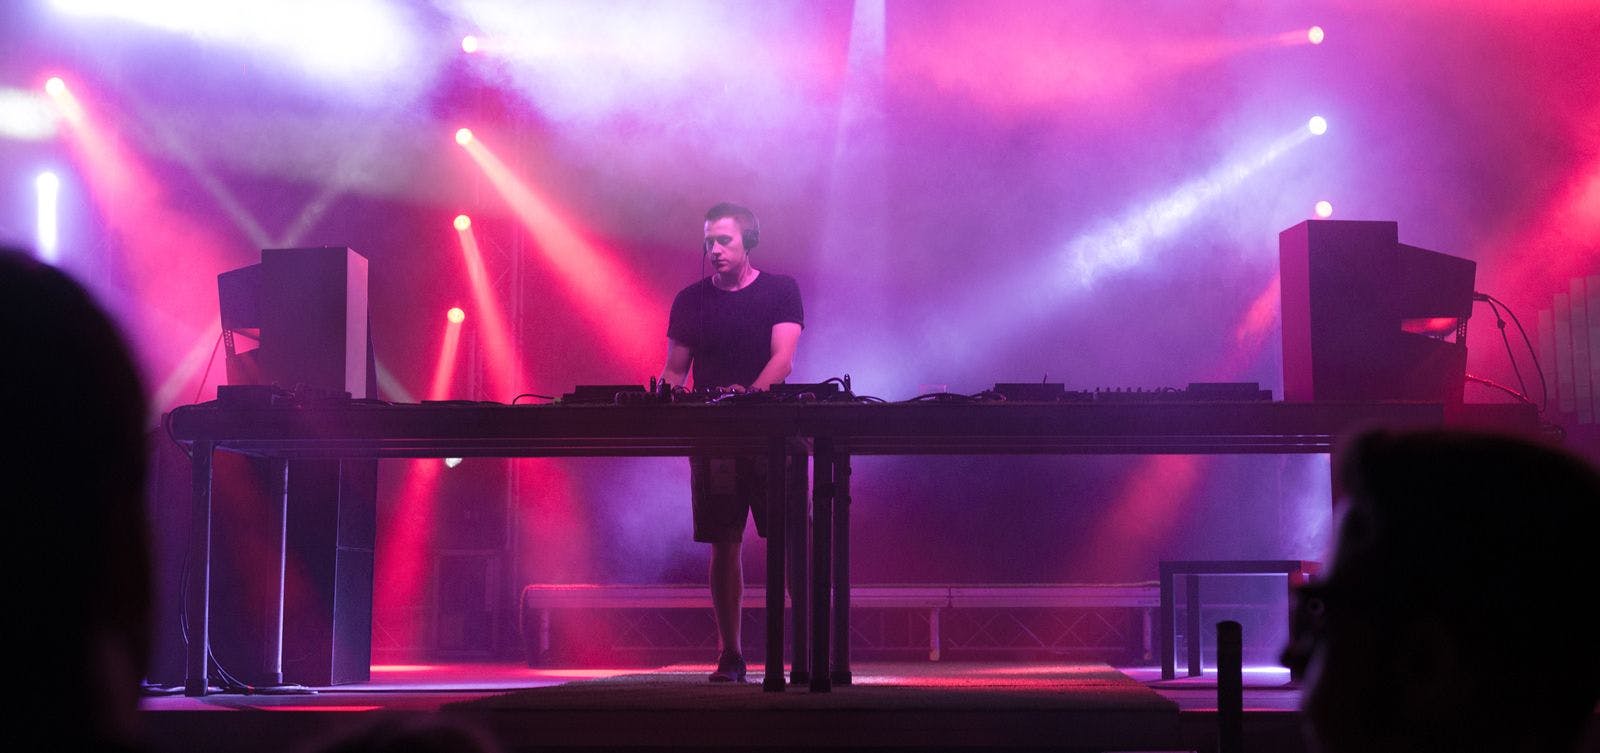 A man DJ's on stage with spotlights and smoke effects